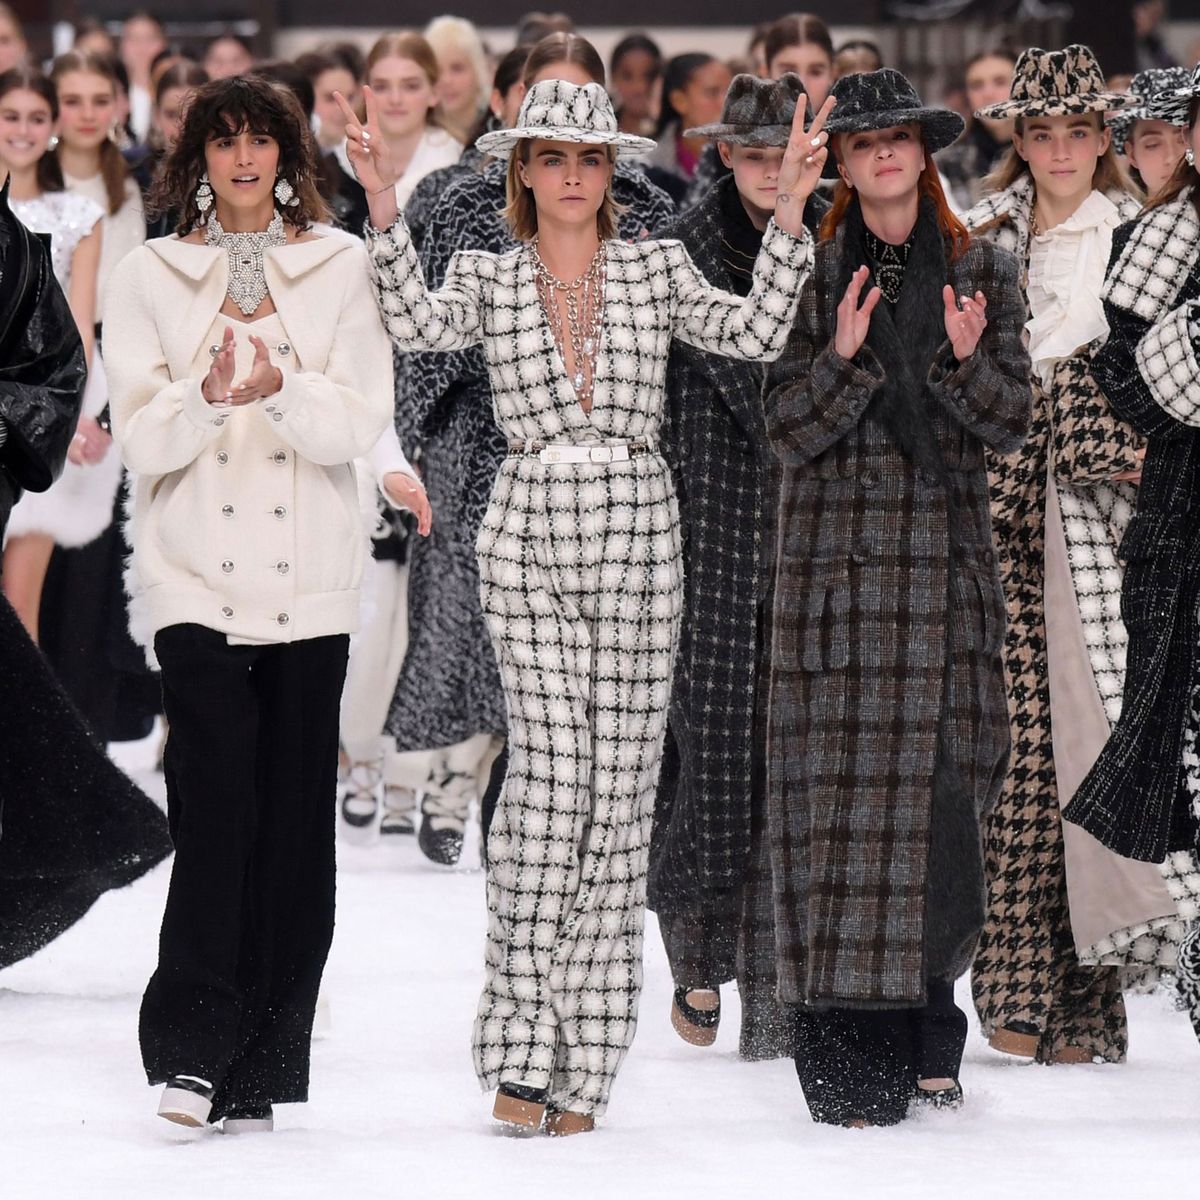 Chanel Honours Karl Lagerfeld With His Final Collection – Vogue Hong Kong